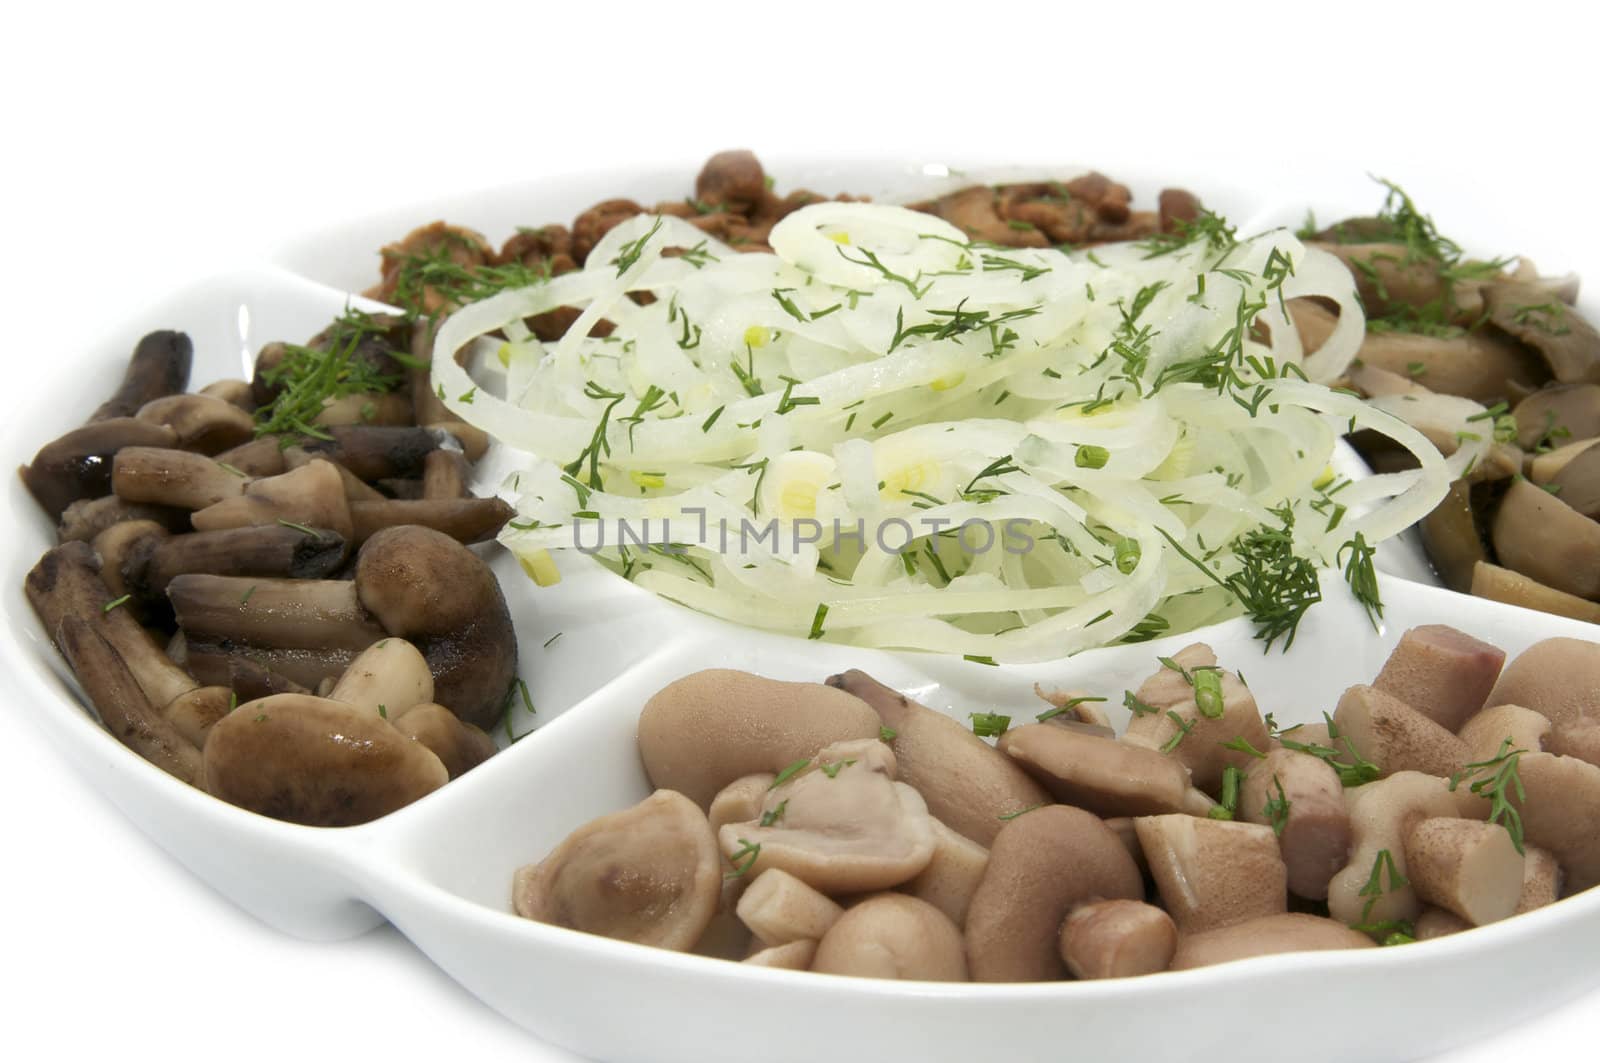 plate with an assortment of mushrooms on a white background